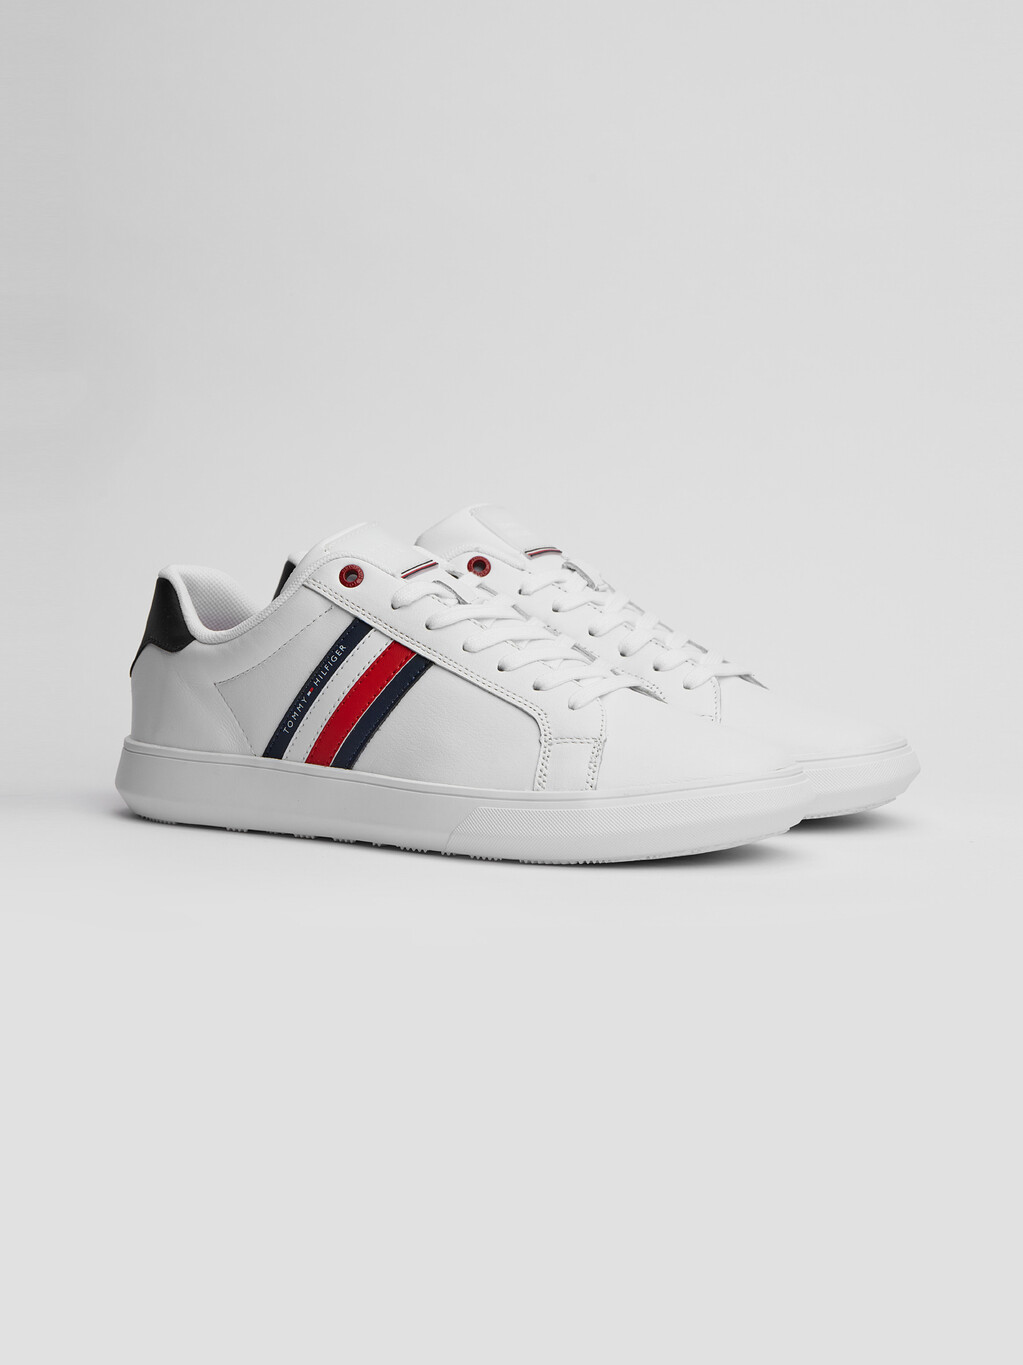 Essential Leather Cupsole Trainers, White, hi-res